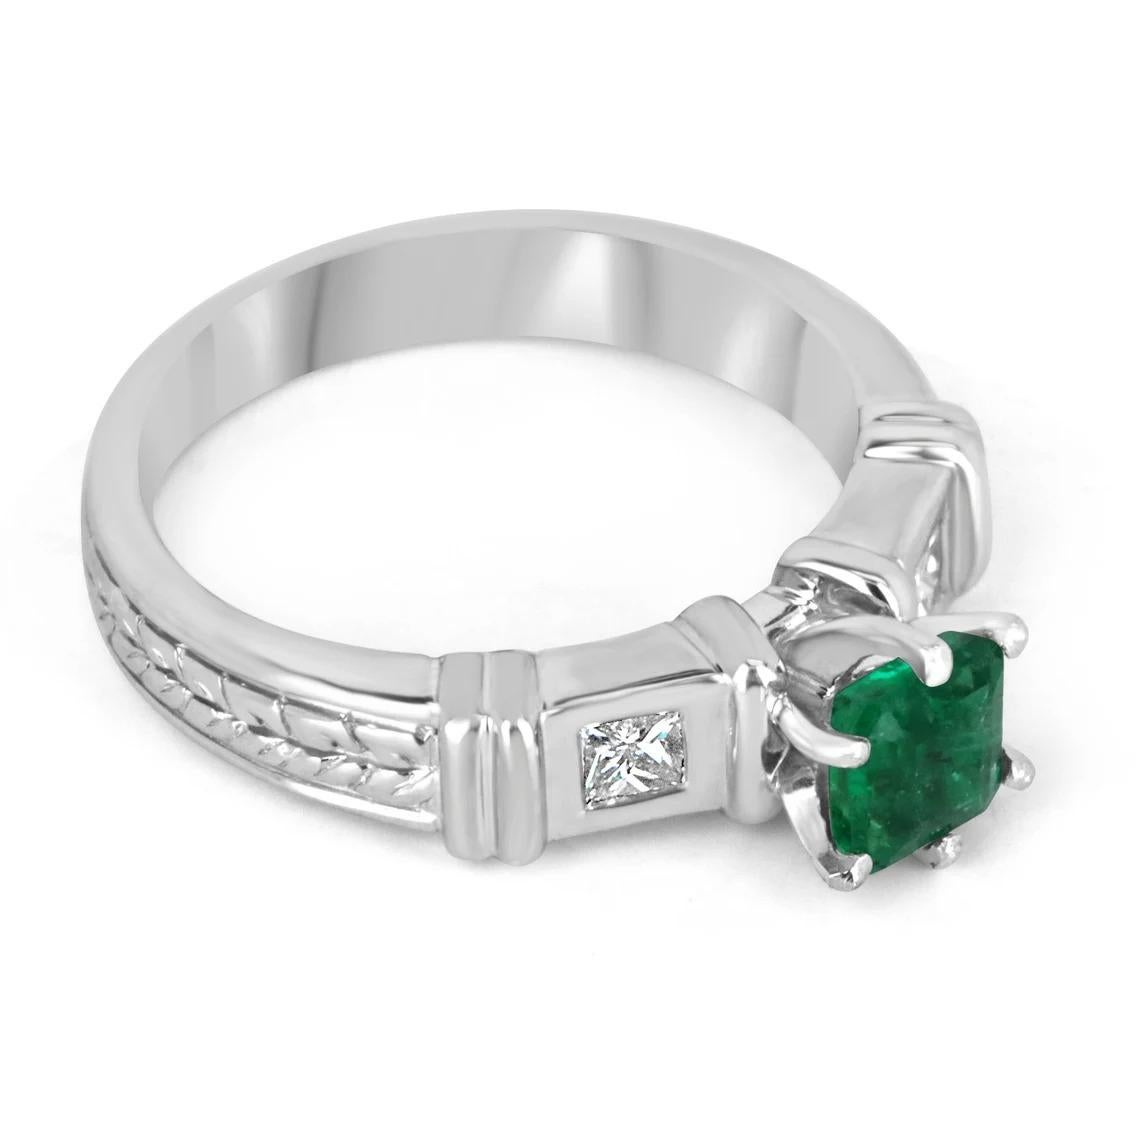 A remarkable emerald and diamond ring. This masterpiece features a desirable emerald green asscher cut emerald in the very center, carried by a six-prong setting. The gemstone in full display showcases high quality, as well as excellent-very good